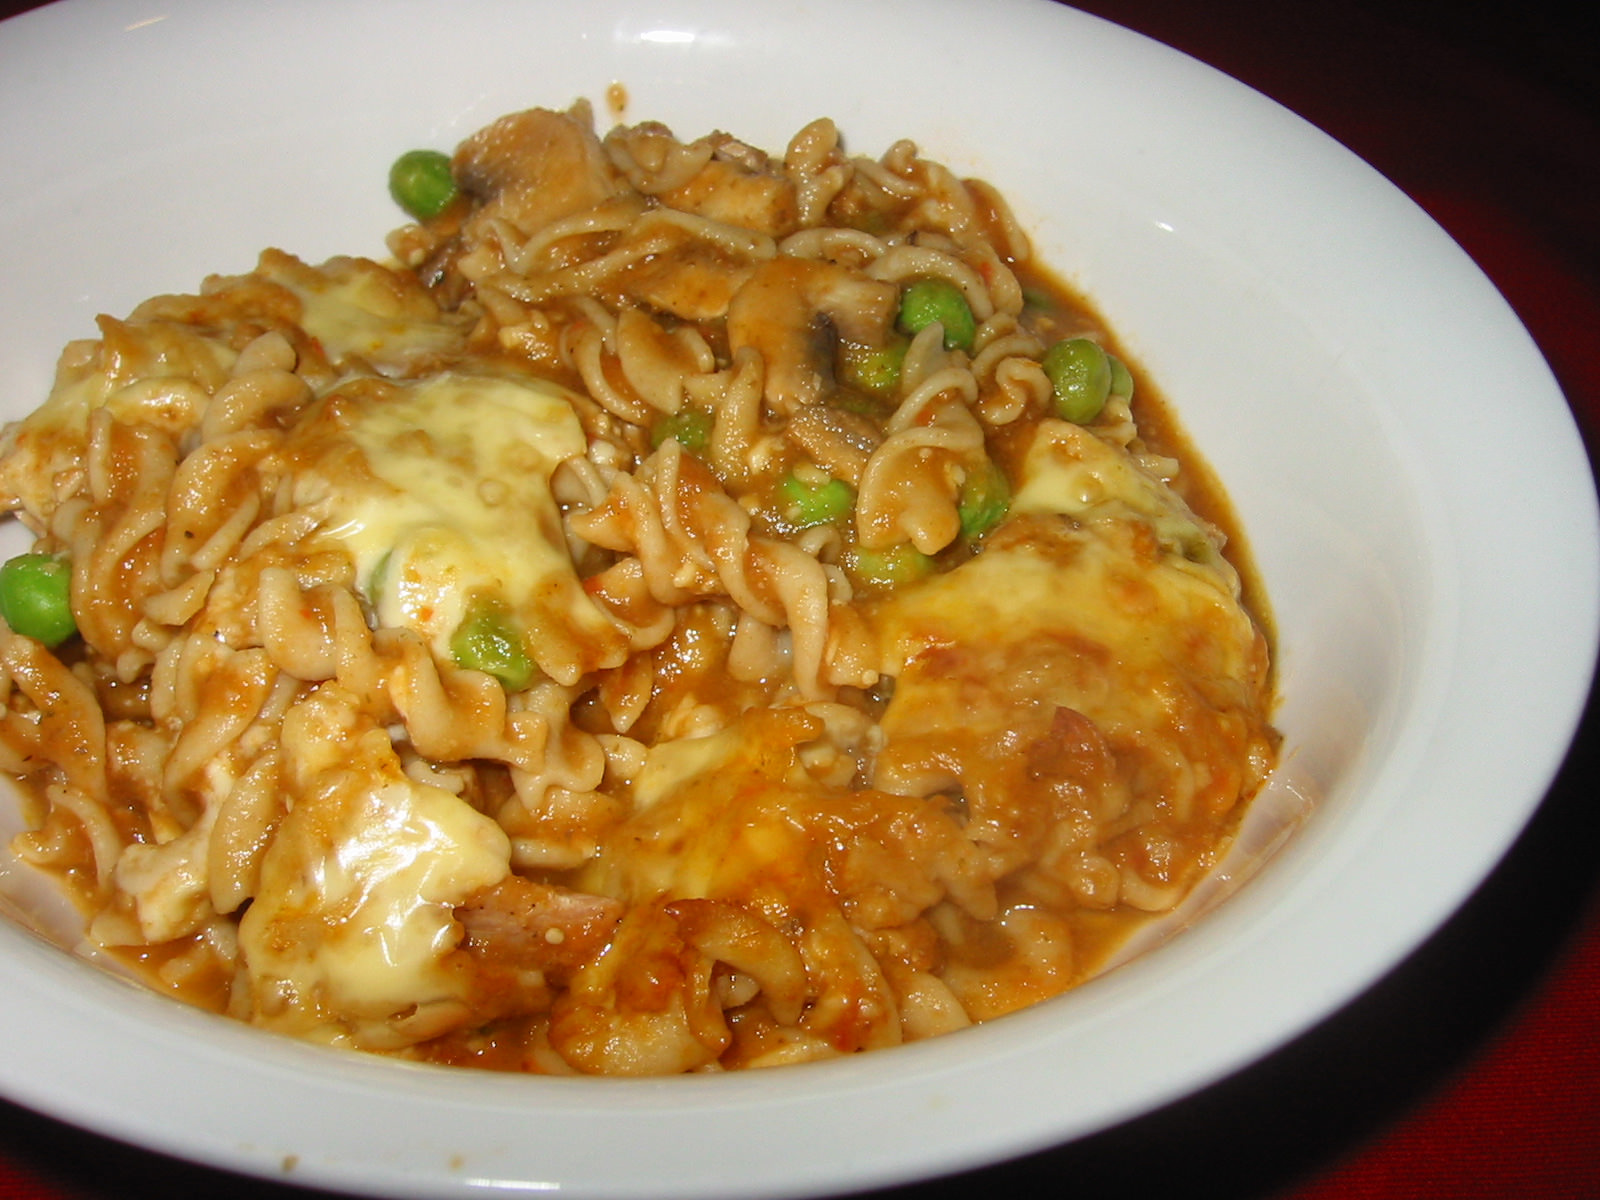 Pasta bake with chicken, mushrooms, peas and (ugh) soya cheese